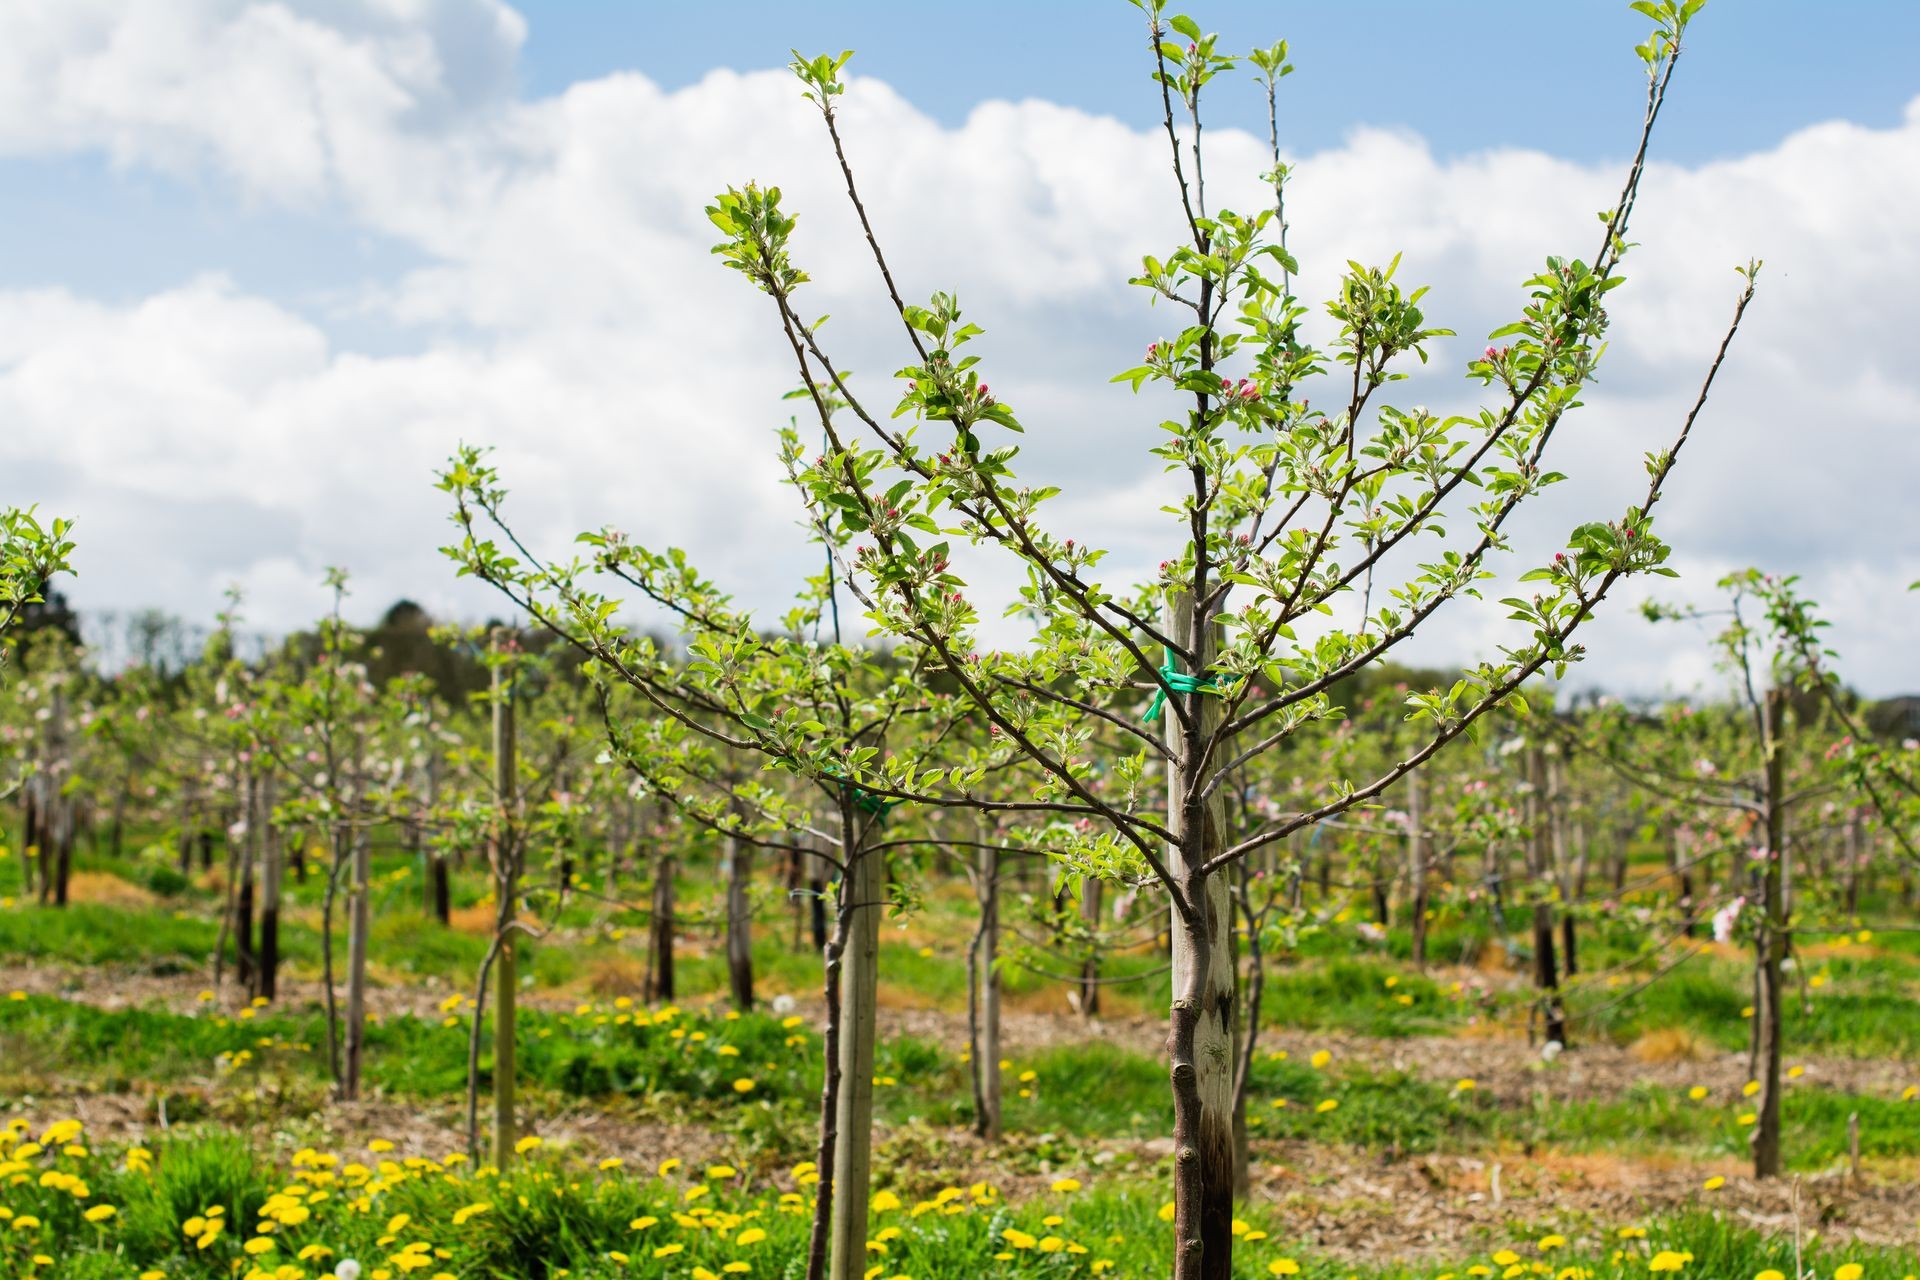 Rows of new young apple trees planted in the orchard, Sussex, England, selective focus